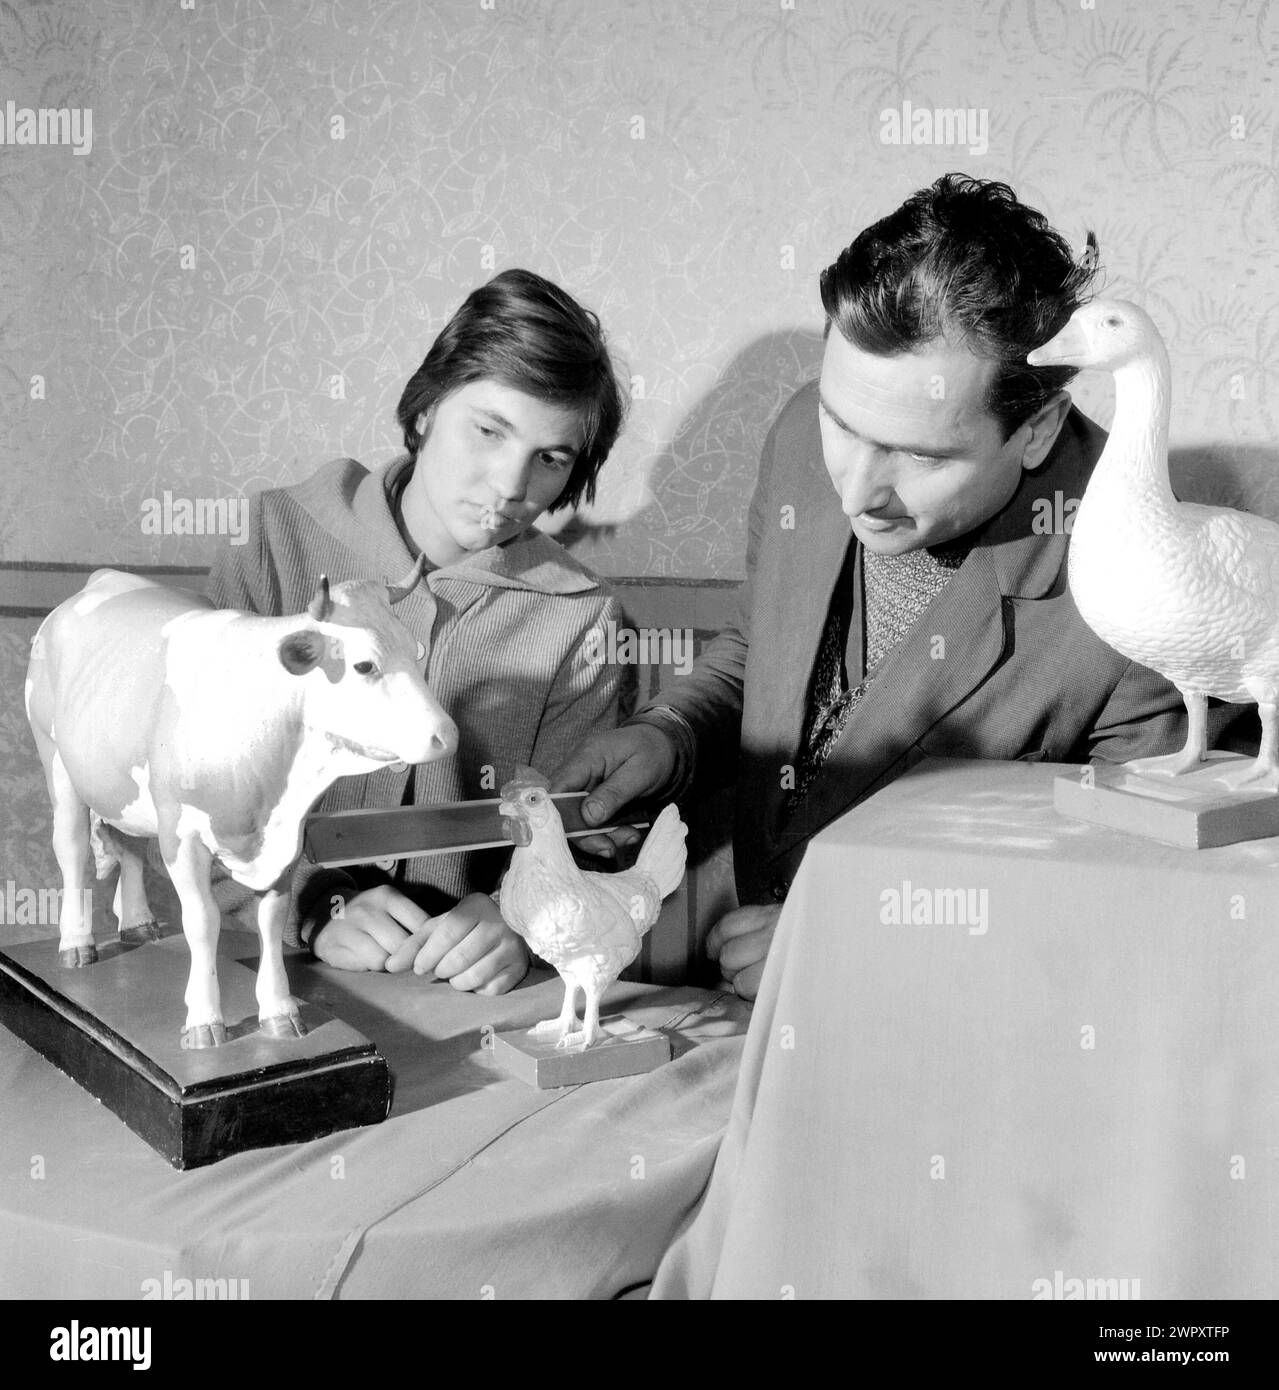 A State Agricultural Cooperative (C.A.P.) in communist Romania, in the 1970s. A vet teaching a student using domestic animals miniature figures. Stock Photo